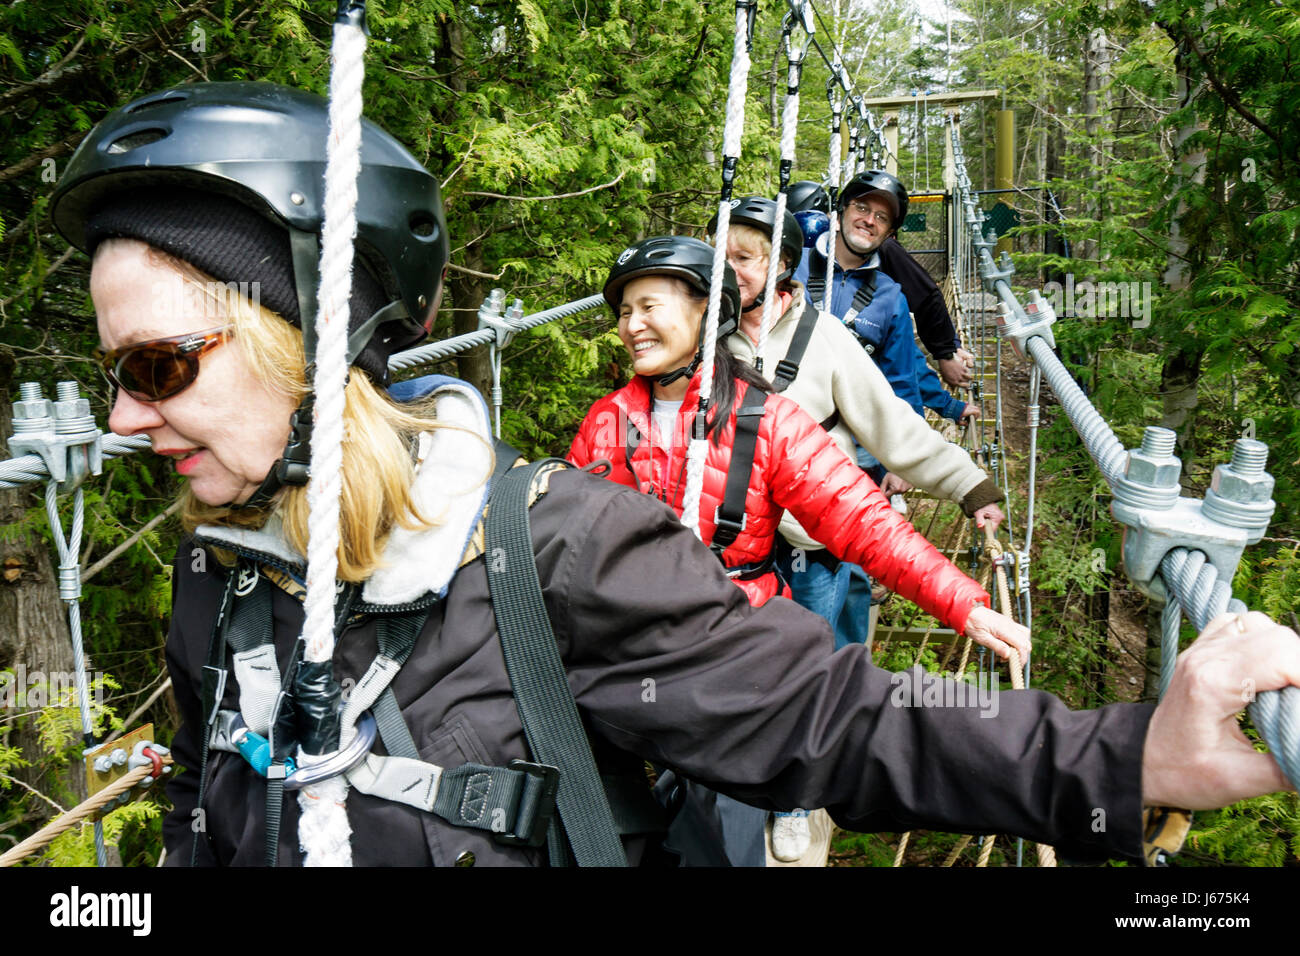 Michigan Mackinaw City,Mackinac State historic Parks Park,historic Mill Creek Discovery Park,Forest Canopy Bridge,zip line safety equipment,helmet,Asi Stock Photo